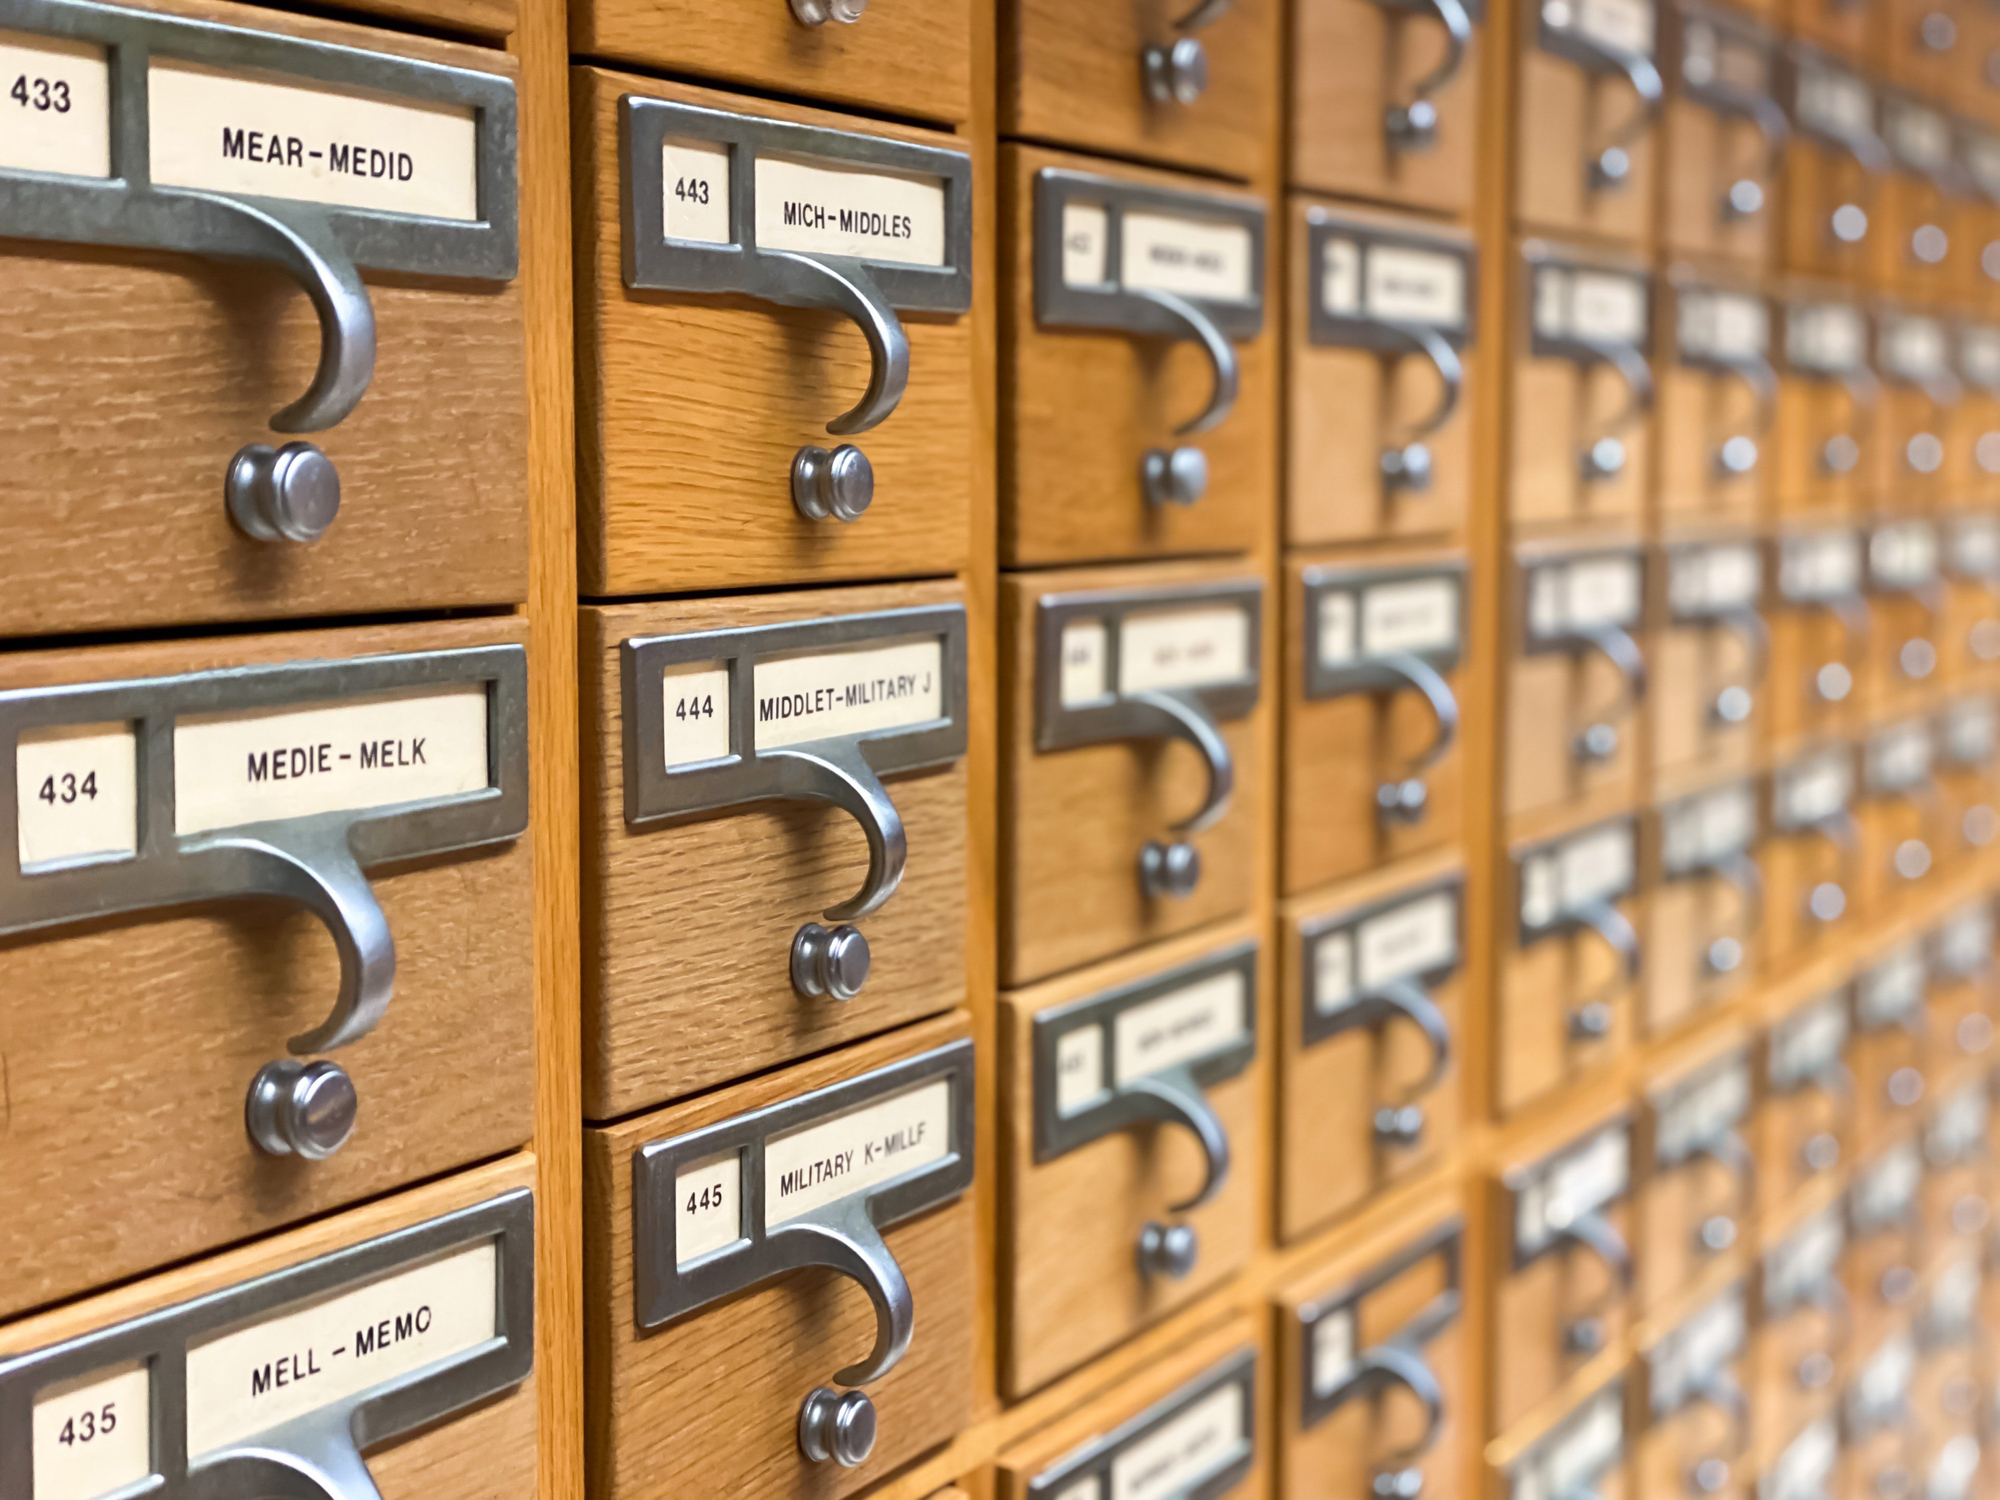 a card catalog in the library